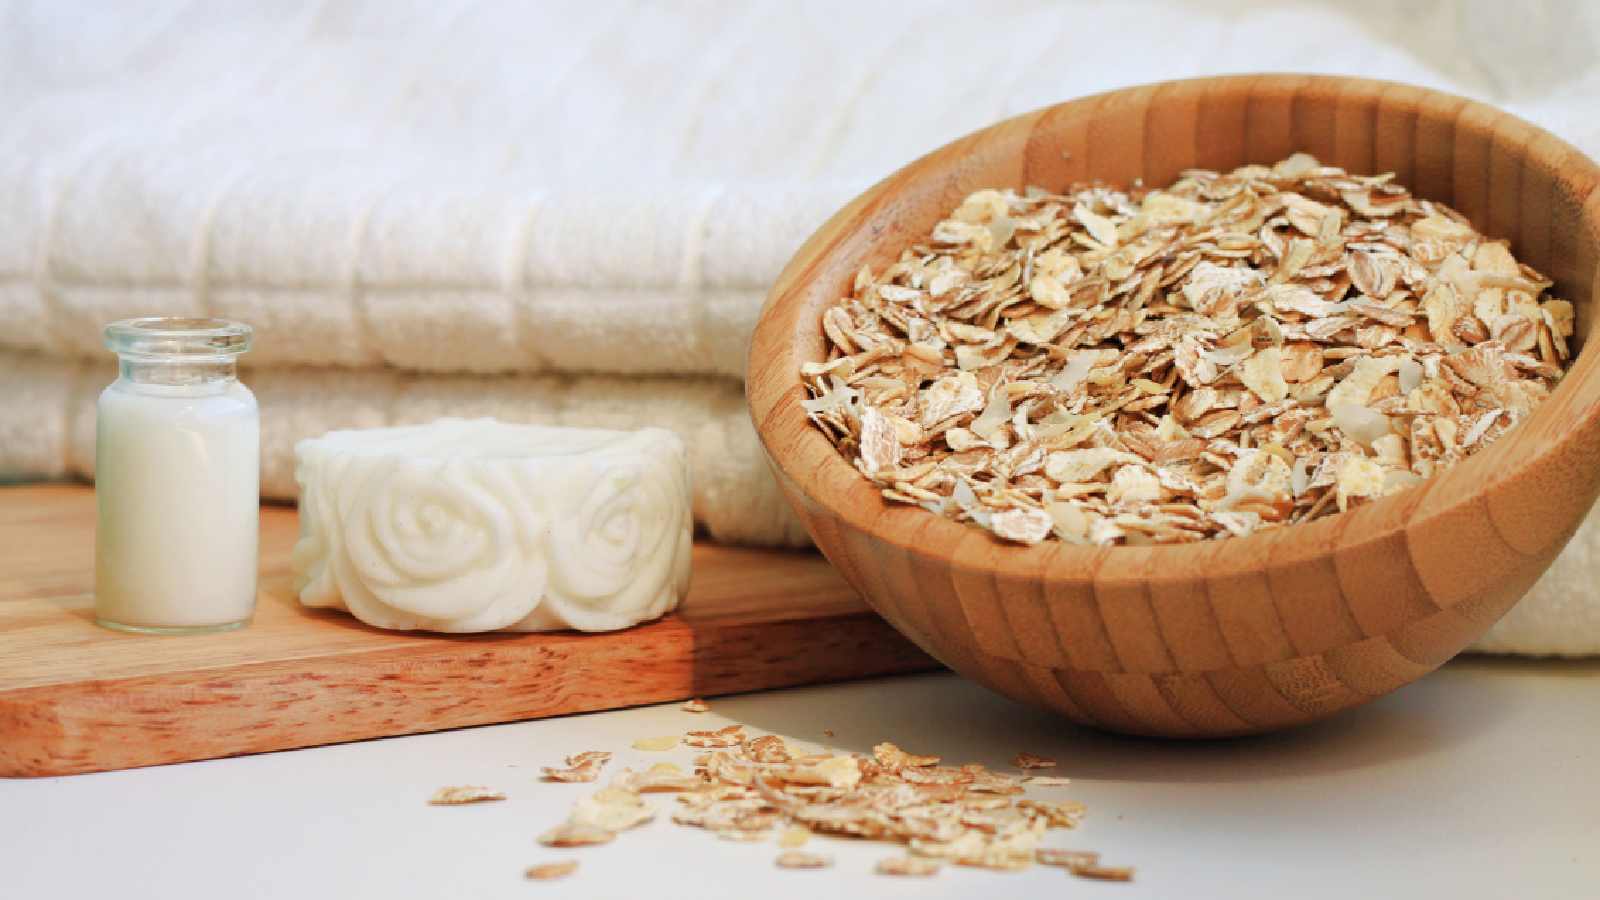 Oatmeal for skin: Benefits and how to use it